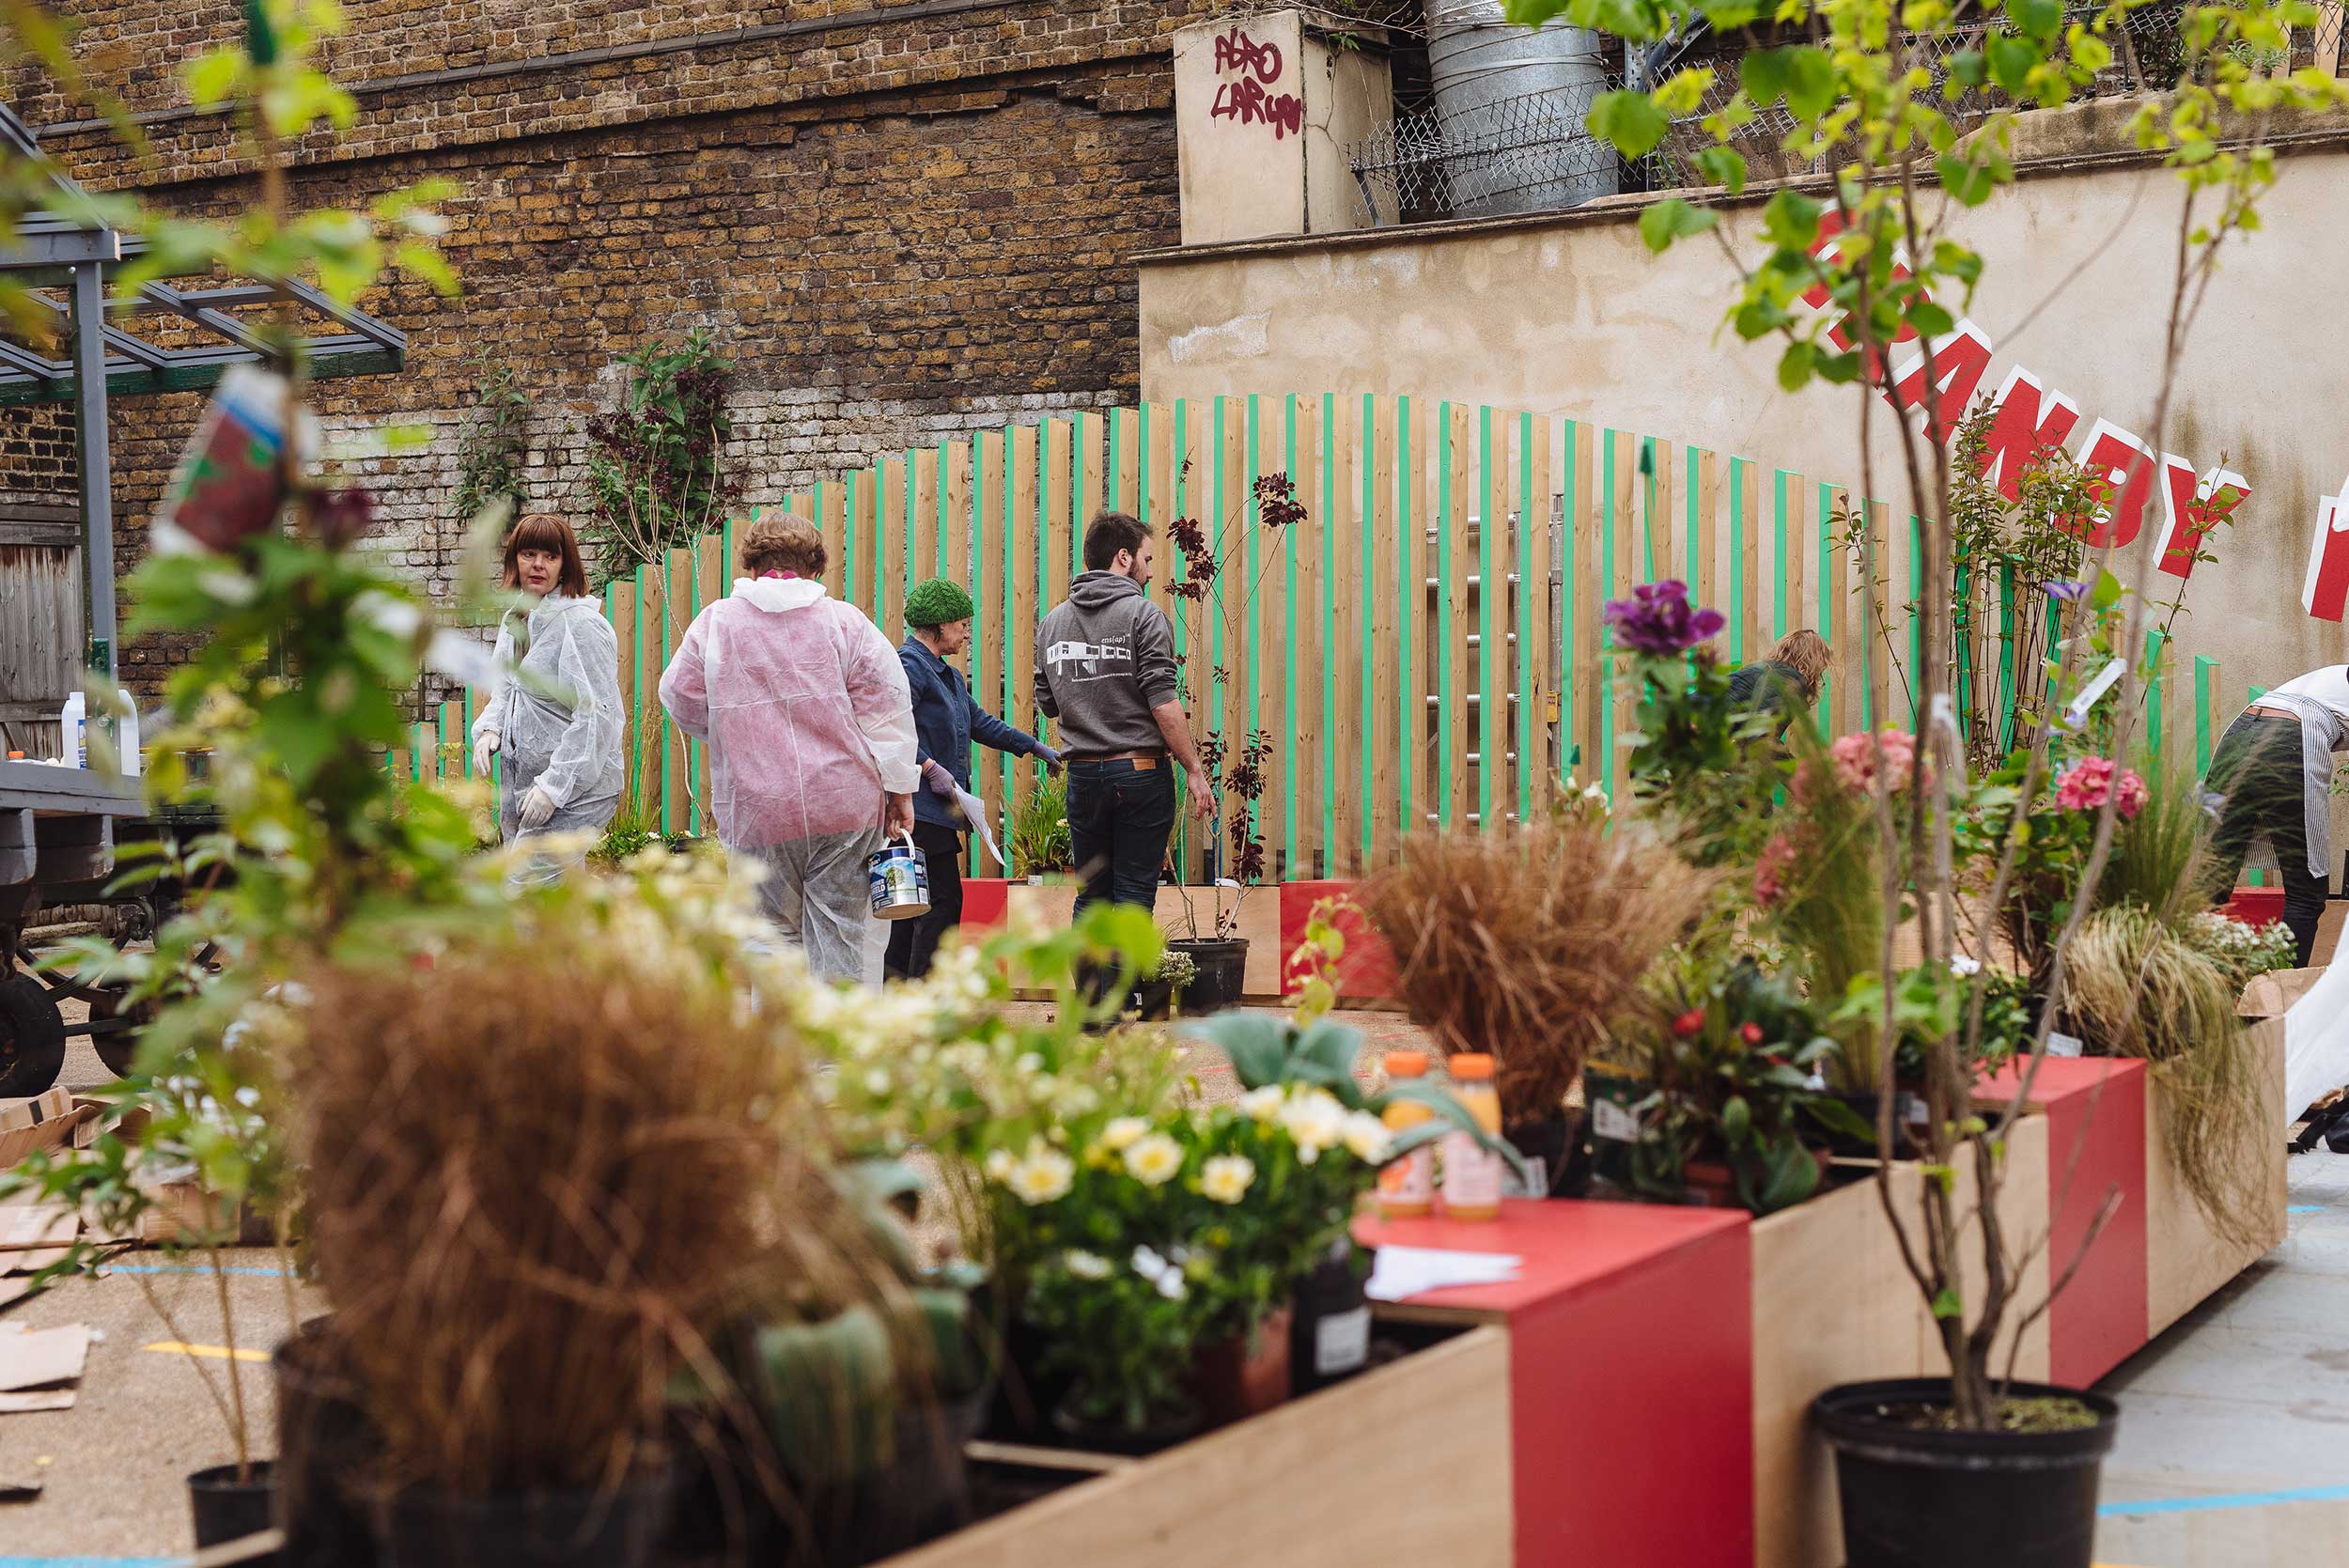 Lower Marsh, Waterloo. ‘Meanwhile’ projects can have an outsize impact on community life. IF_DO’s transformation of a single-storey building and adjacent yard provided the community with affordable workspace and a public square while the building was awaiting redevelopment. 